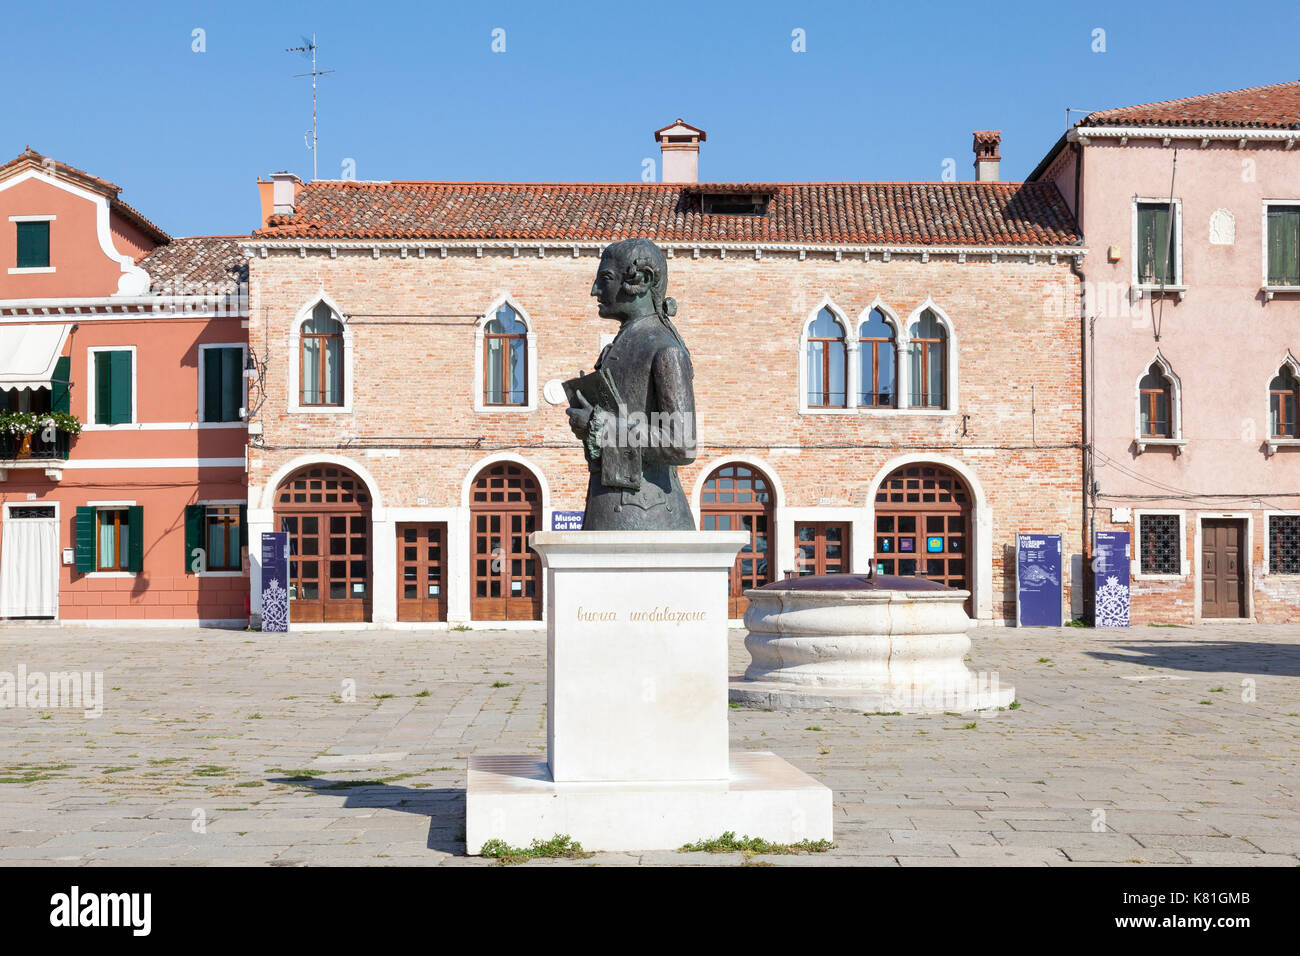 Statue of Baldassare Galuppi in Piazza Baldassare Galuppi, Burano, Venice, Veneto,  Italy, with the lace museum and ancient well head behind. Stock Photo